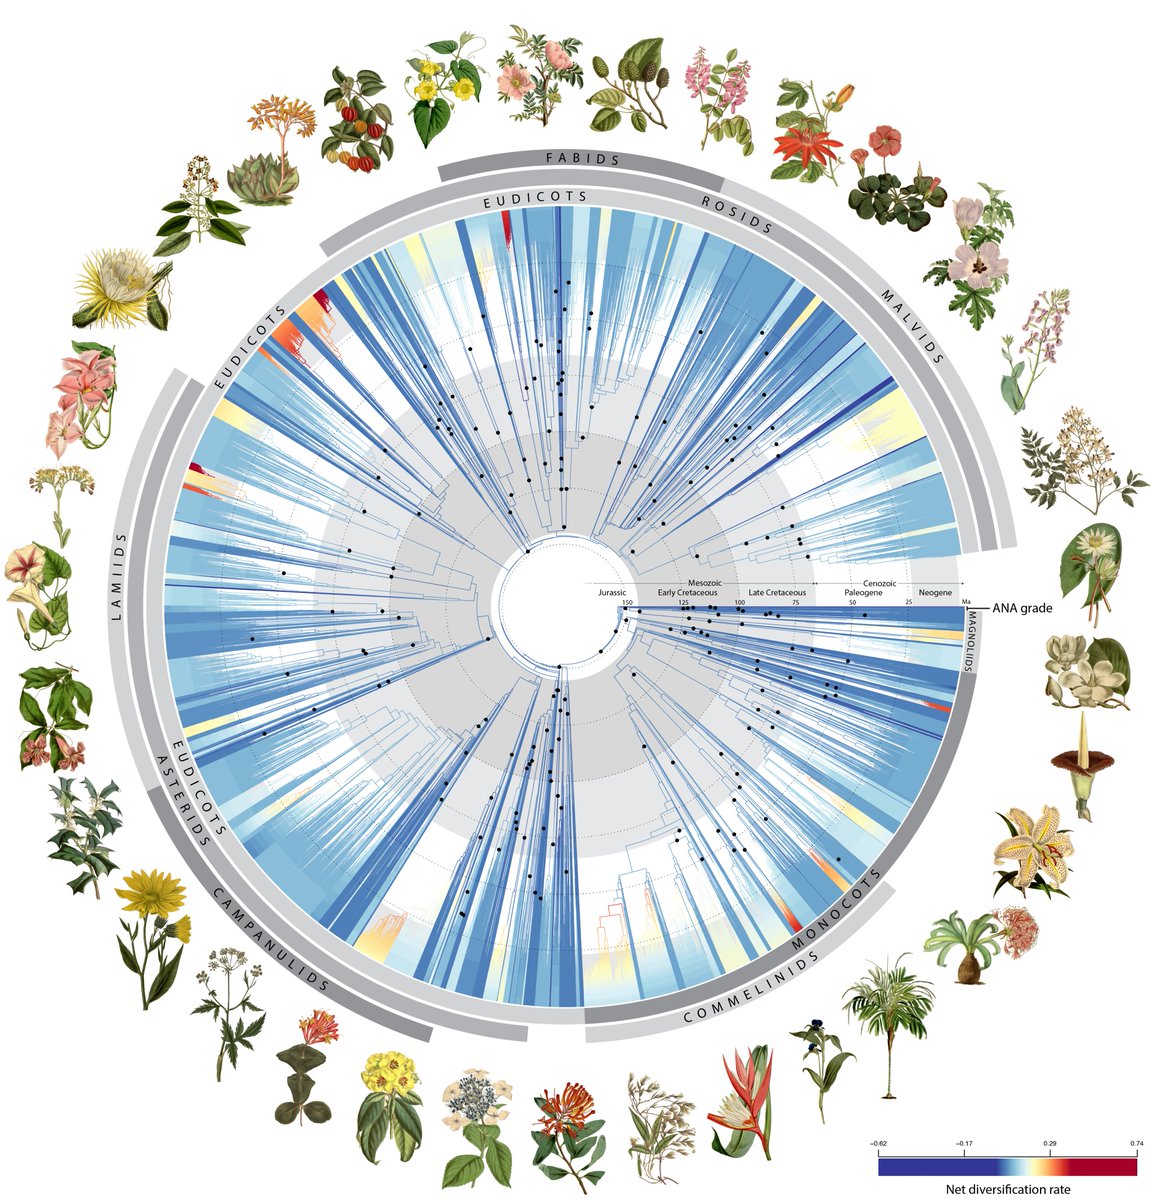 NEW TODAY in @Nature - A vast DNA tree of life brings open access DNA sequences of >9500 flowering plants! 🧬 This invaluable resource crafted by 279 scientists lets us answer key questions about modern plant life and look back in time to its origins 🌿 nature.com/articles/s4158…